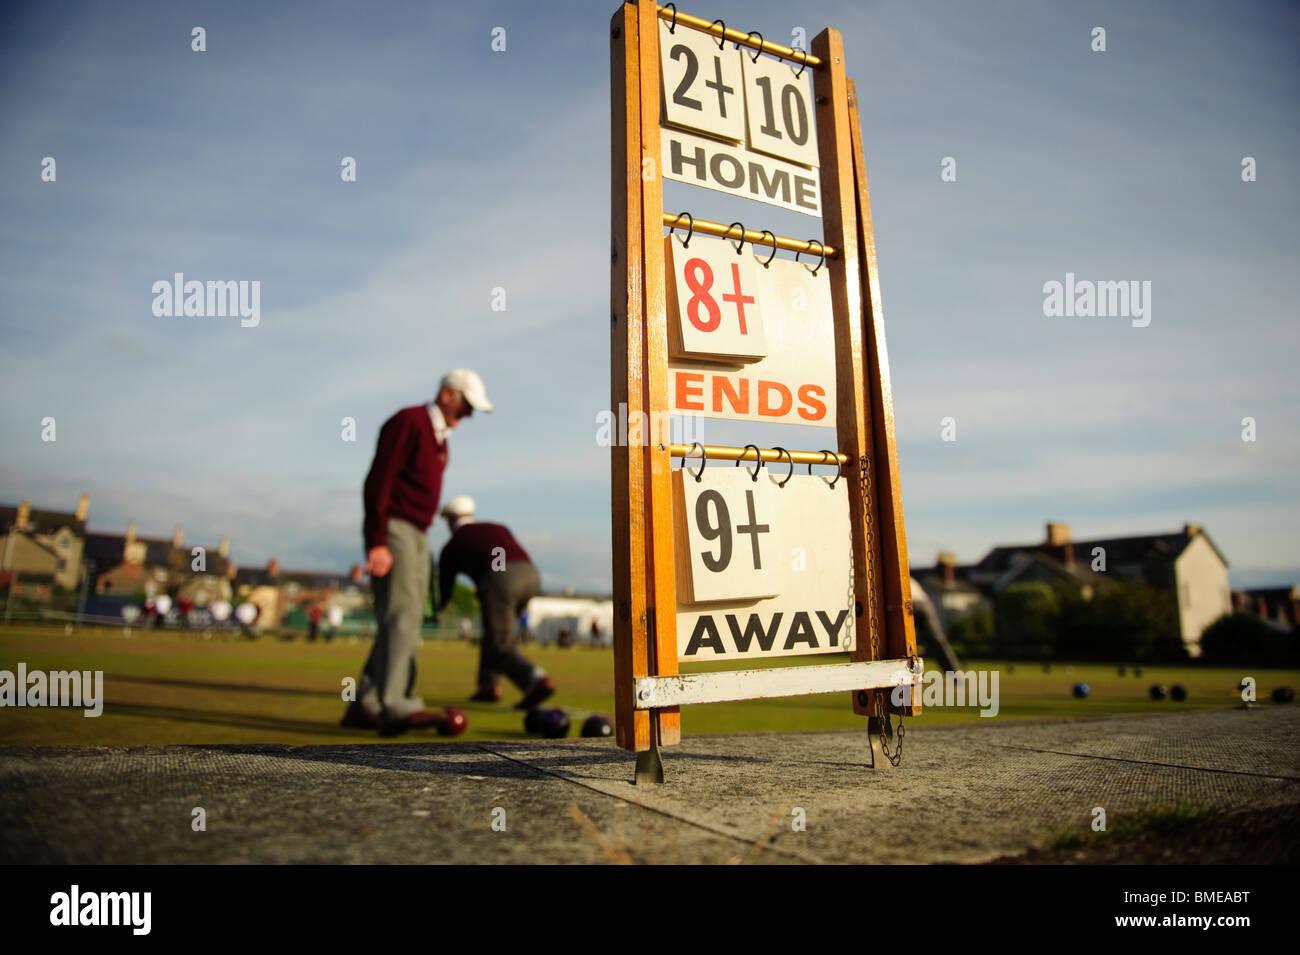 Men playing a game of lawn green bowls on a summer evening, Aberystwyth Wales UK Stock Photo